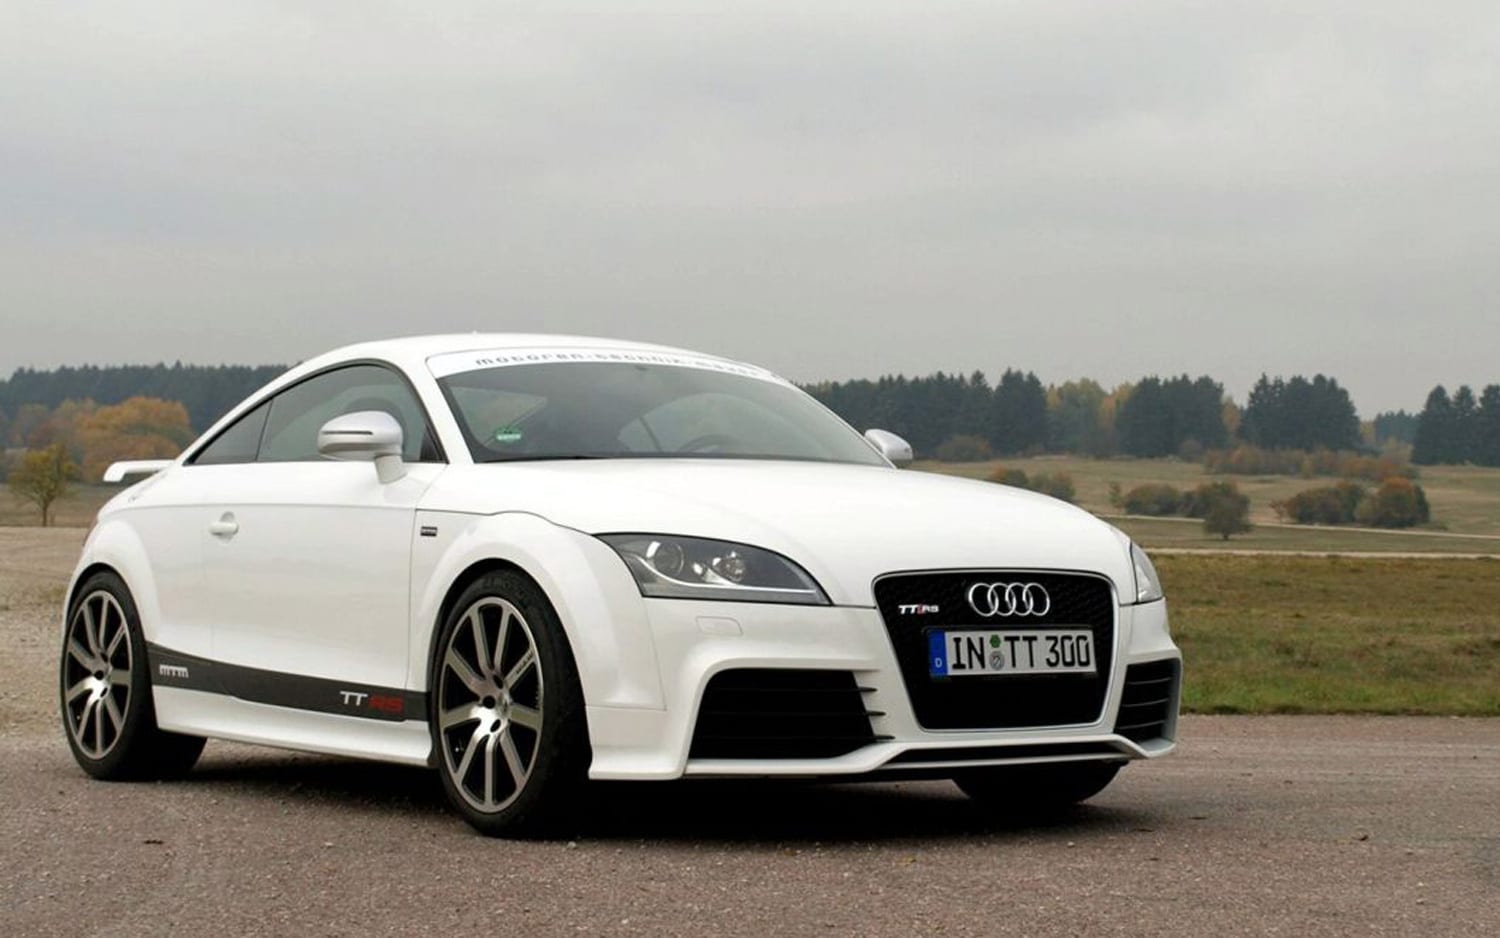 MTM Gives 2009 Audi TT-RS 424 hp, 185 mph Top Speed